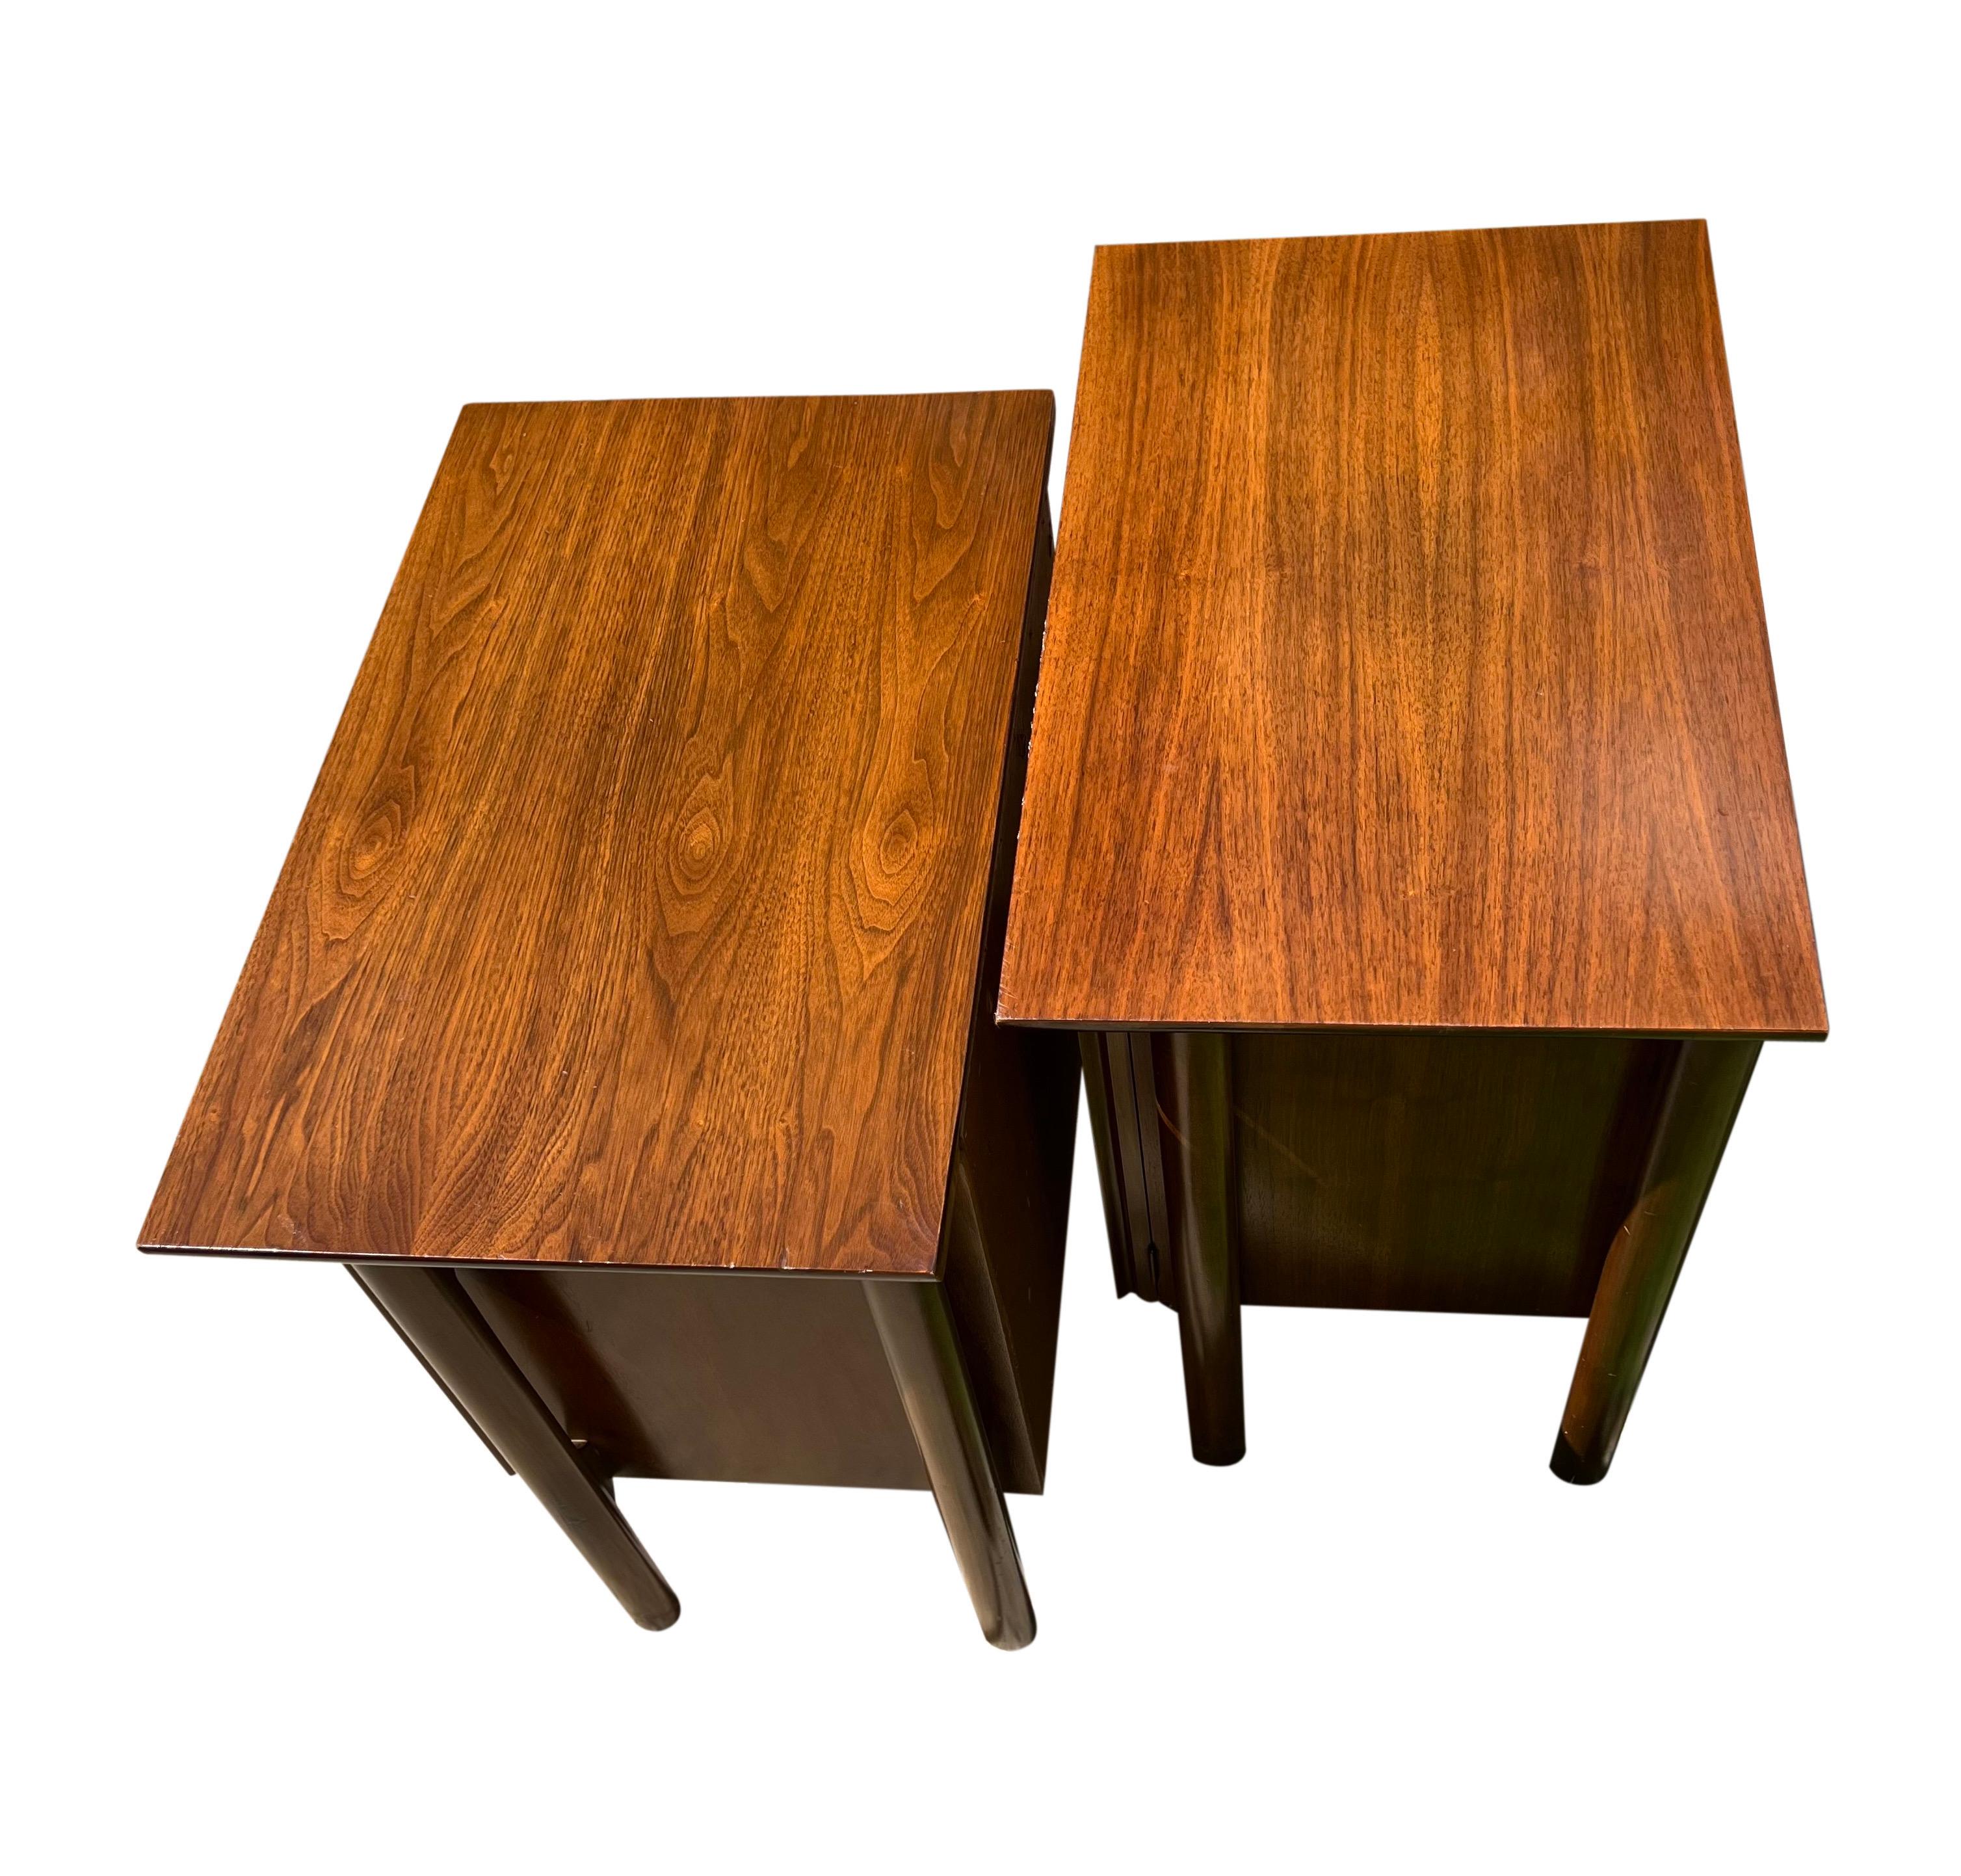 Caning Mid Century Walnut Floating Nightstands with Cane Panel Doors